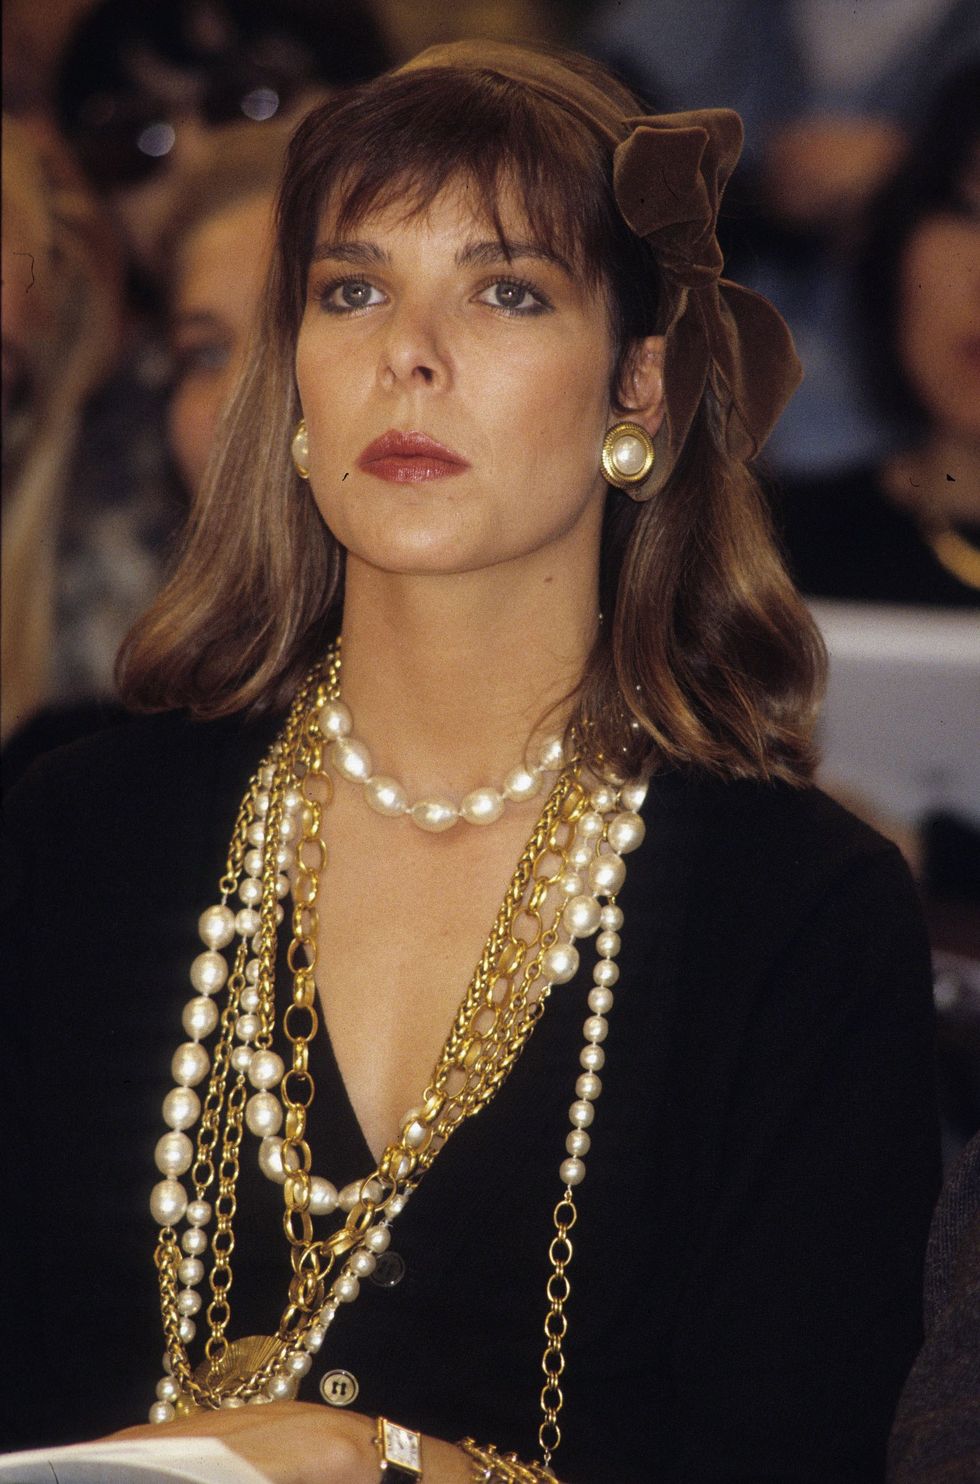 paris, france   undated file photo  princess caroline of monaco, a member of the grimaldi family, attends an event in 1989 in paris, france princess caroline married ernst august v, prince of hanover in 1999 and is also titled as caroline, princess of hanover she will be celebrating her 50th birthday on january 23rd photo by michel dufourwireimage